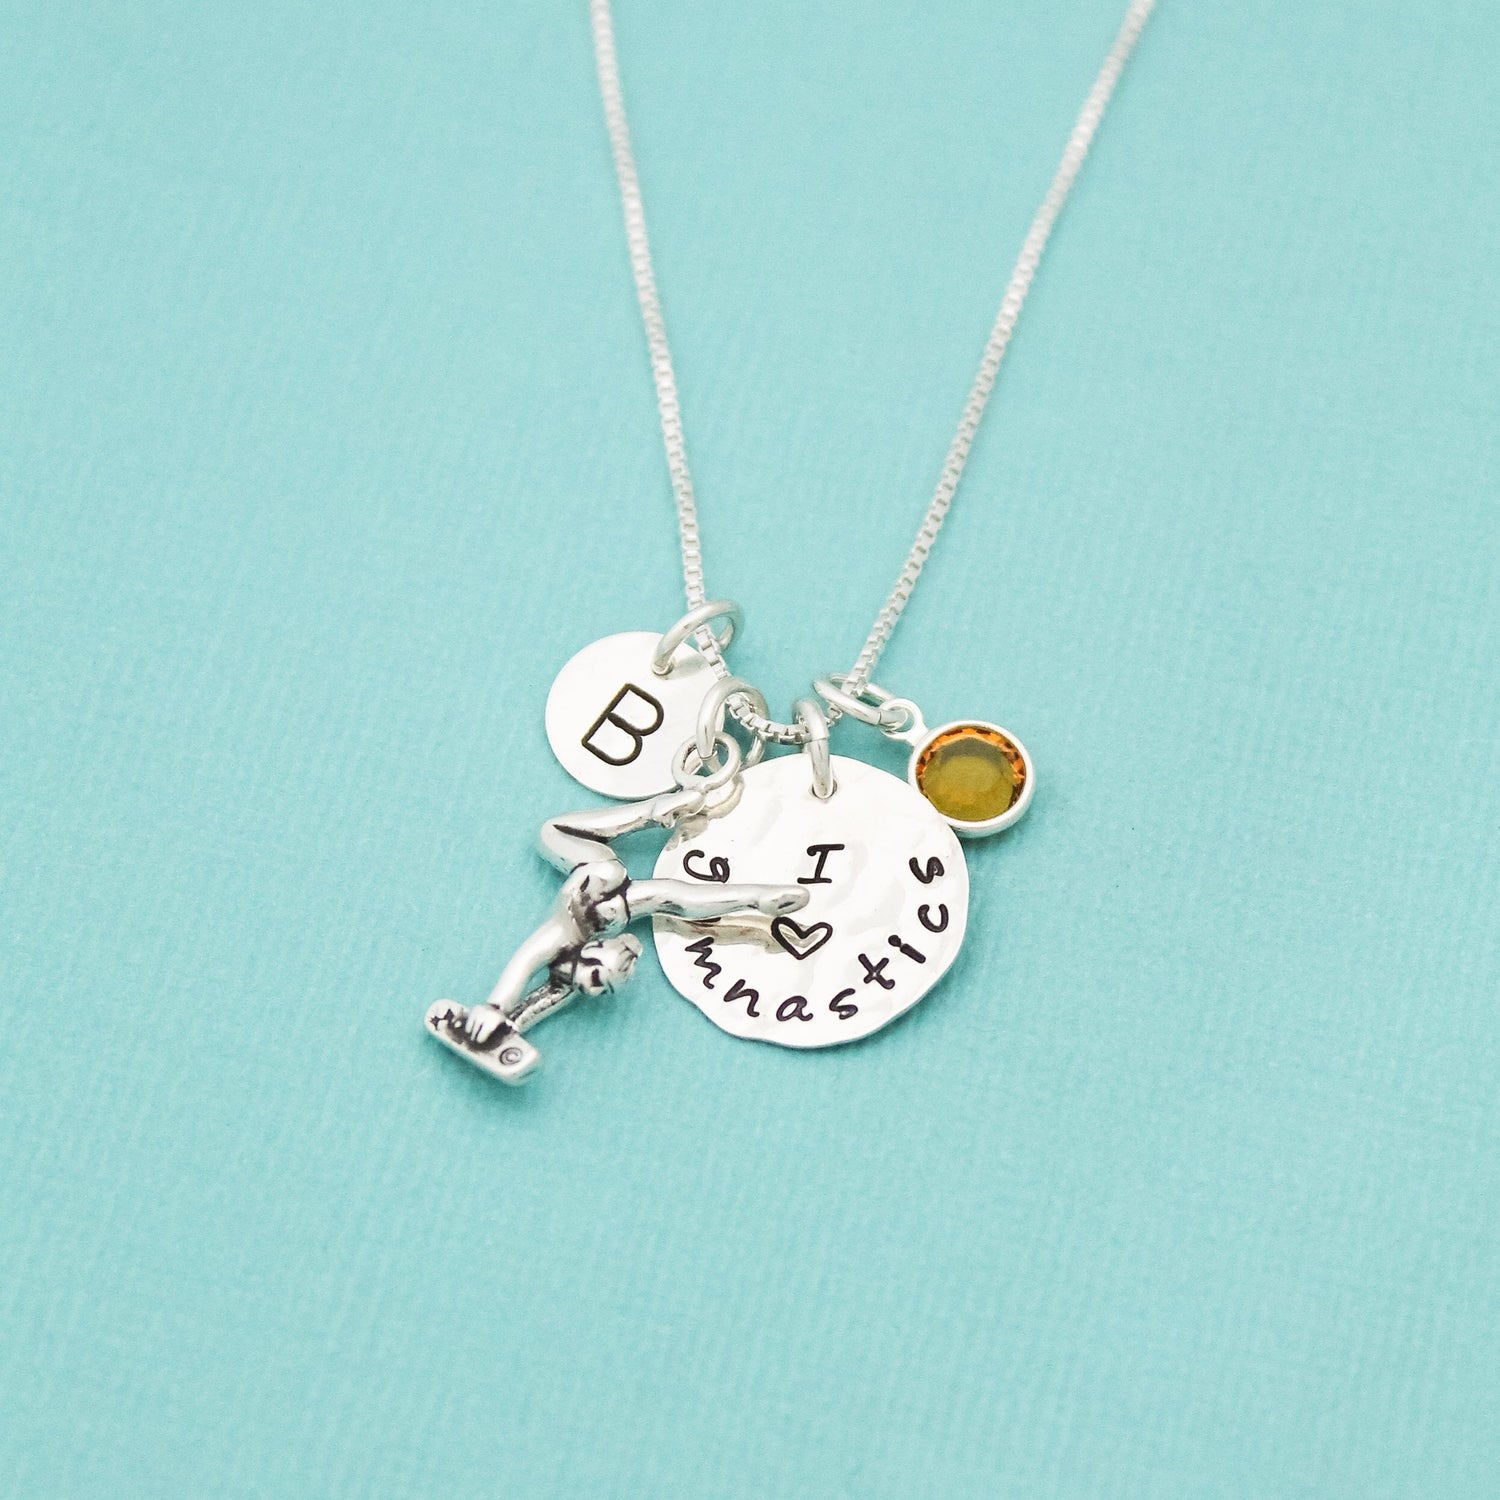 Sterling Silver Gymnastics Necklace with Crystal Birthstone and Initial Personalized Hand Stamped Necklace, Gymnast Sports Necklace